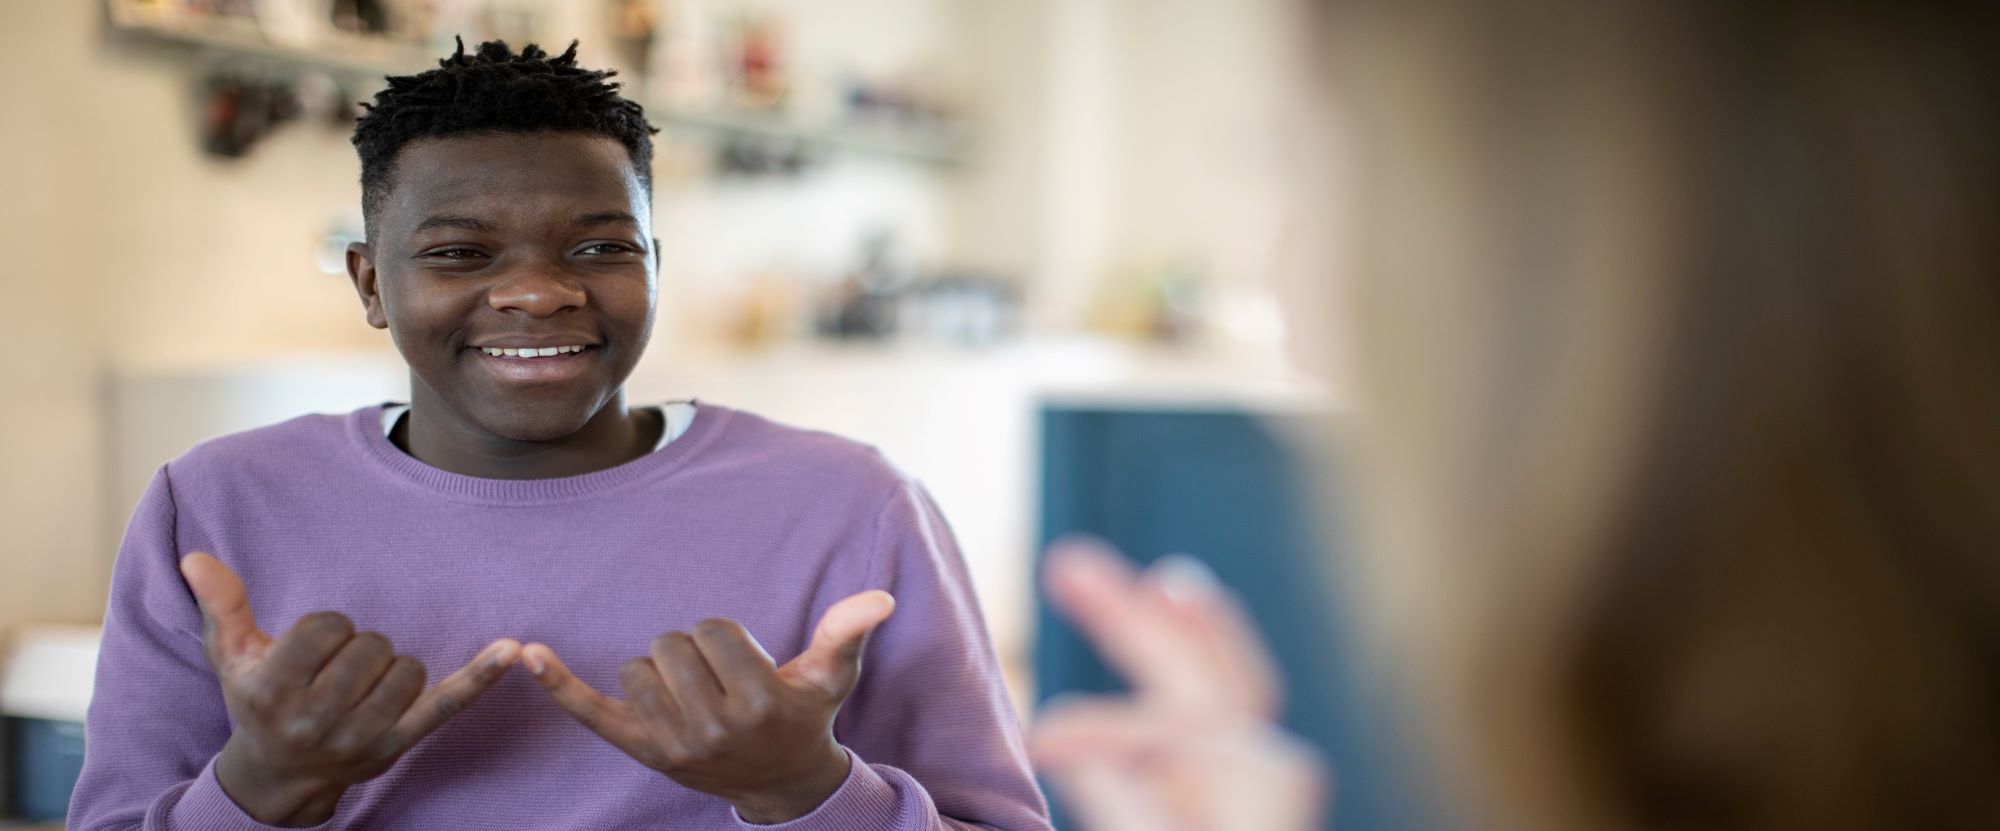 A black young man, wearing a purple jumper, using sign language. He is smiling.